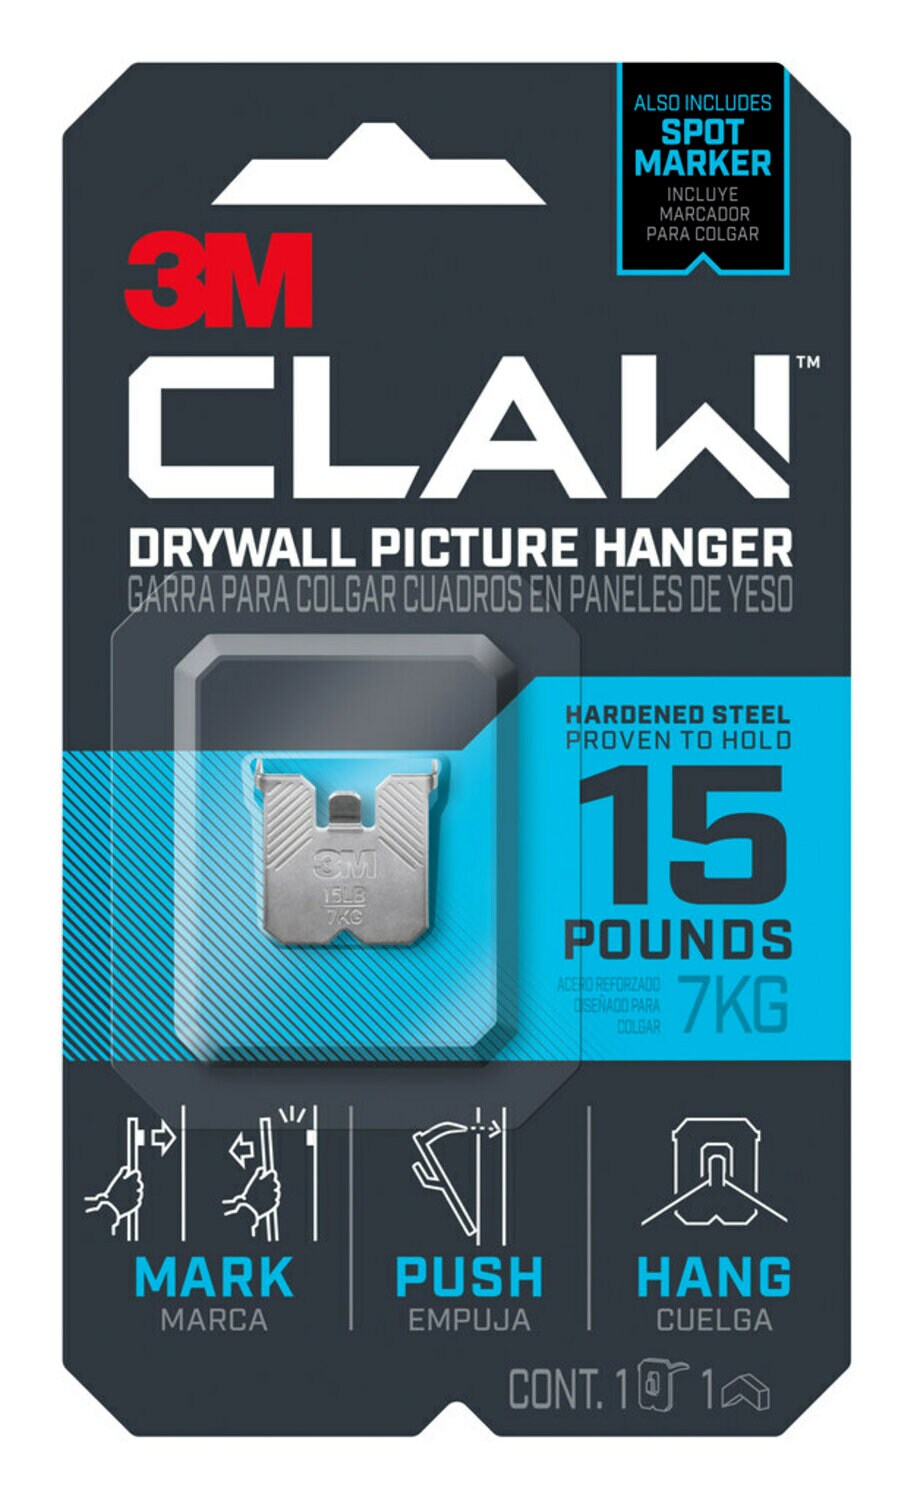 7100227267 - 3M CLAW Drywall Picture Hanger 15 lb with Temporary Spot Marker 3PH15M-1EF, 1 hanger, 1 marker